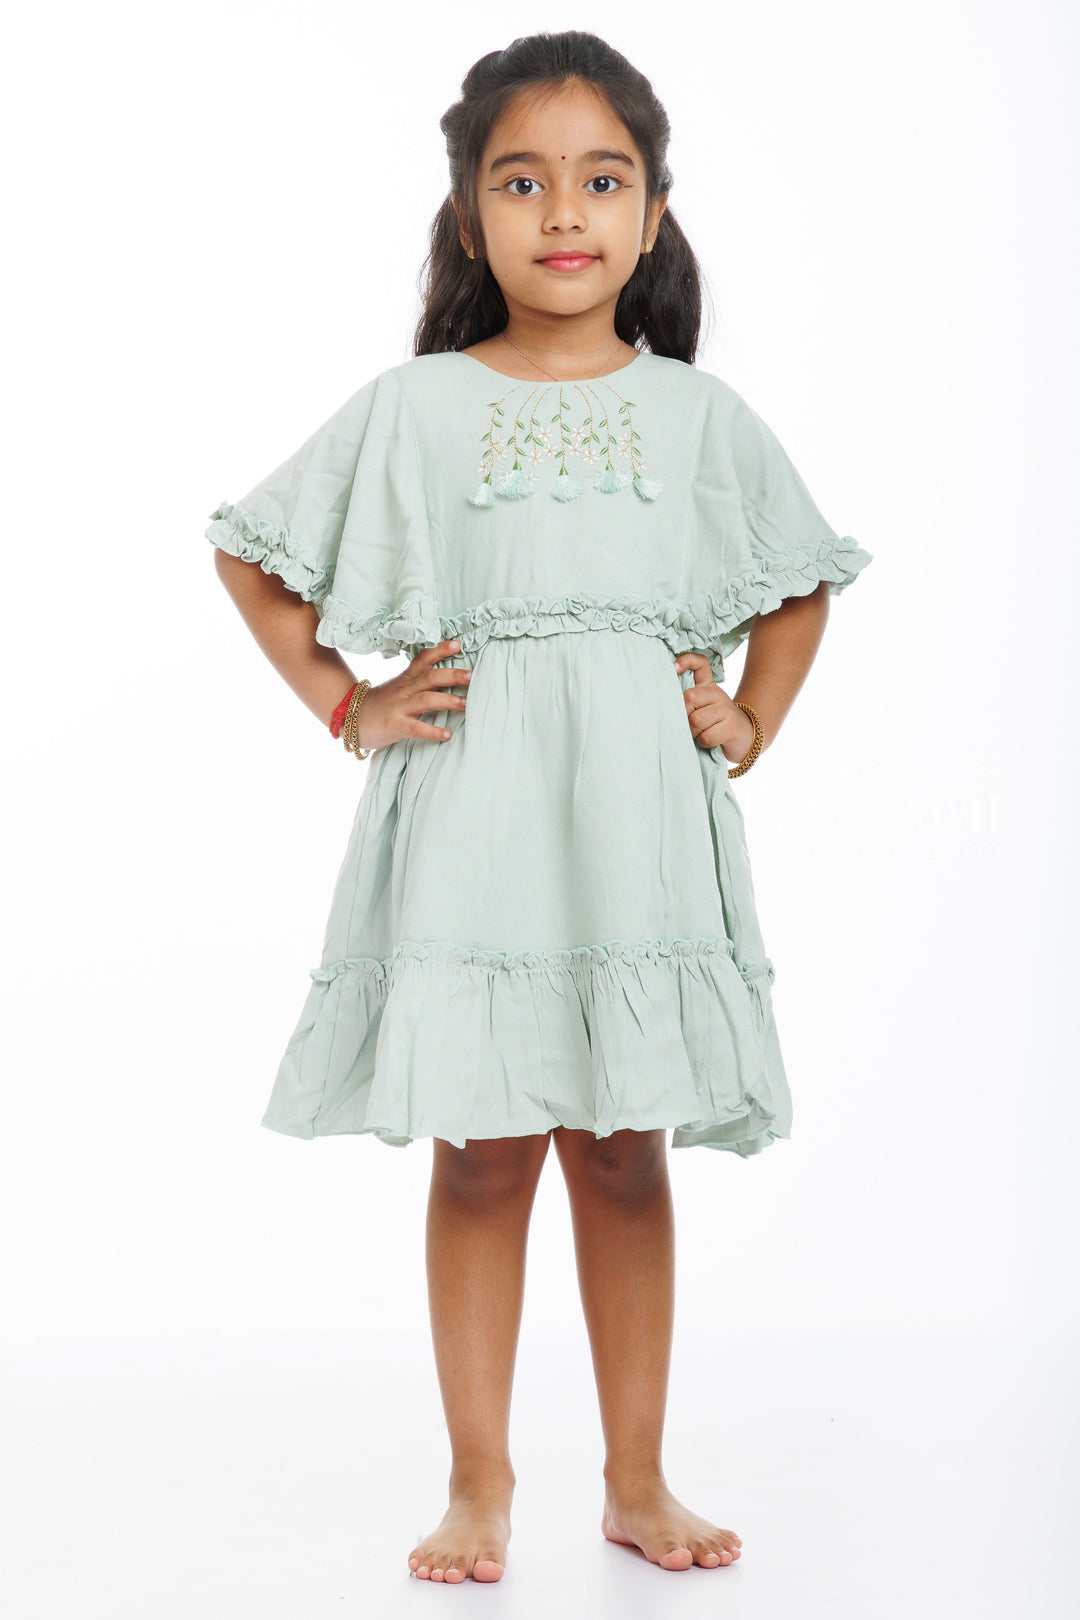 The Nesavu Girls Cotton Frock Enchanted Forest Green Cotton Frock for Little Girls Nesavu 18 (2Y) / Green / Cotton GFC1301C-18 Buy Girls Green Embroidered Cotton Frock | Exclusive Daily Wear Designs | The Nesavu